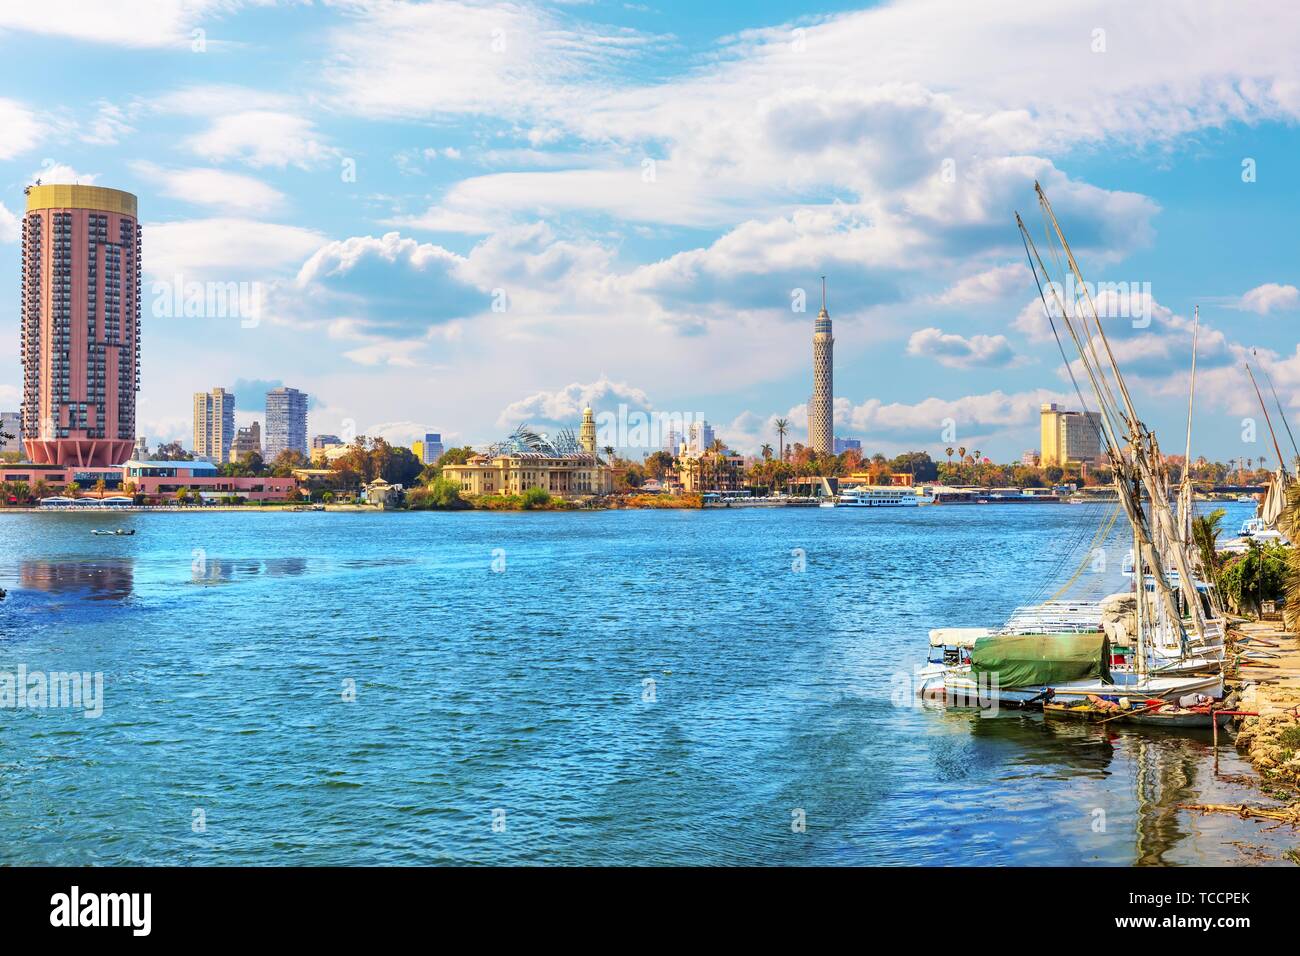 Cairo view, the Tower and hotels in the harbour of Nile, Egypt. Stock Photo